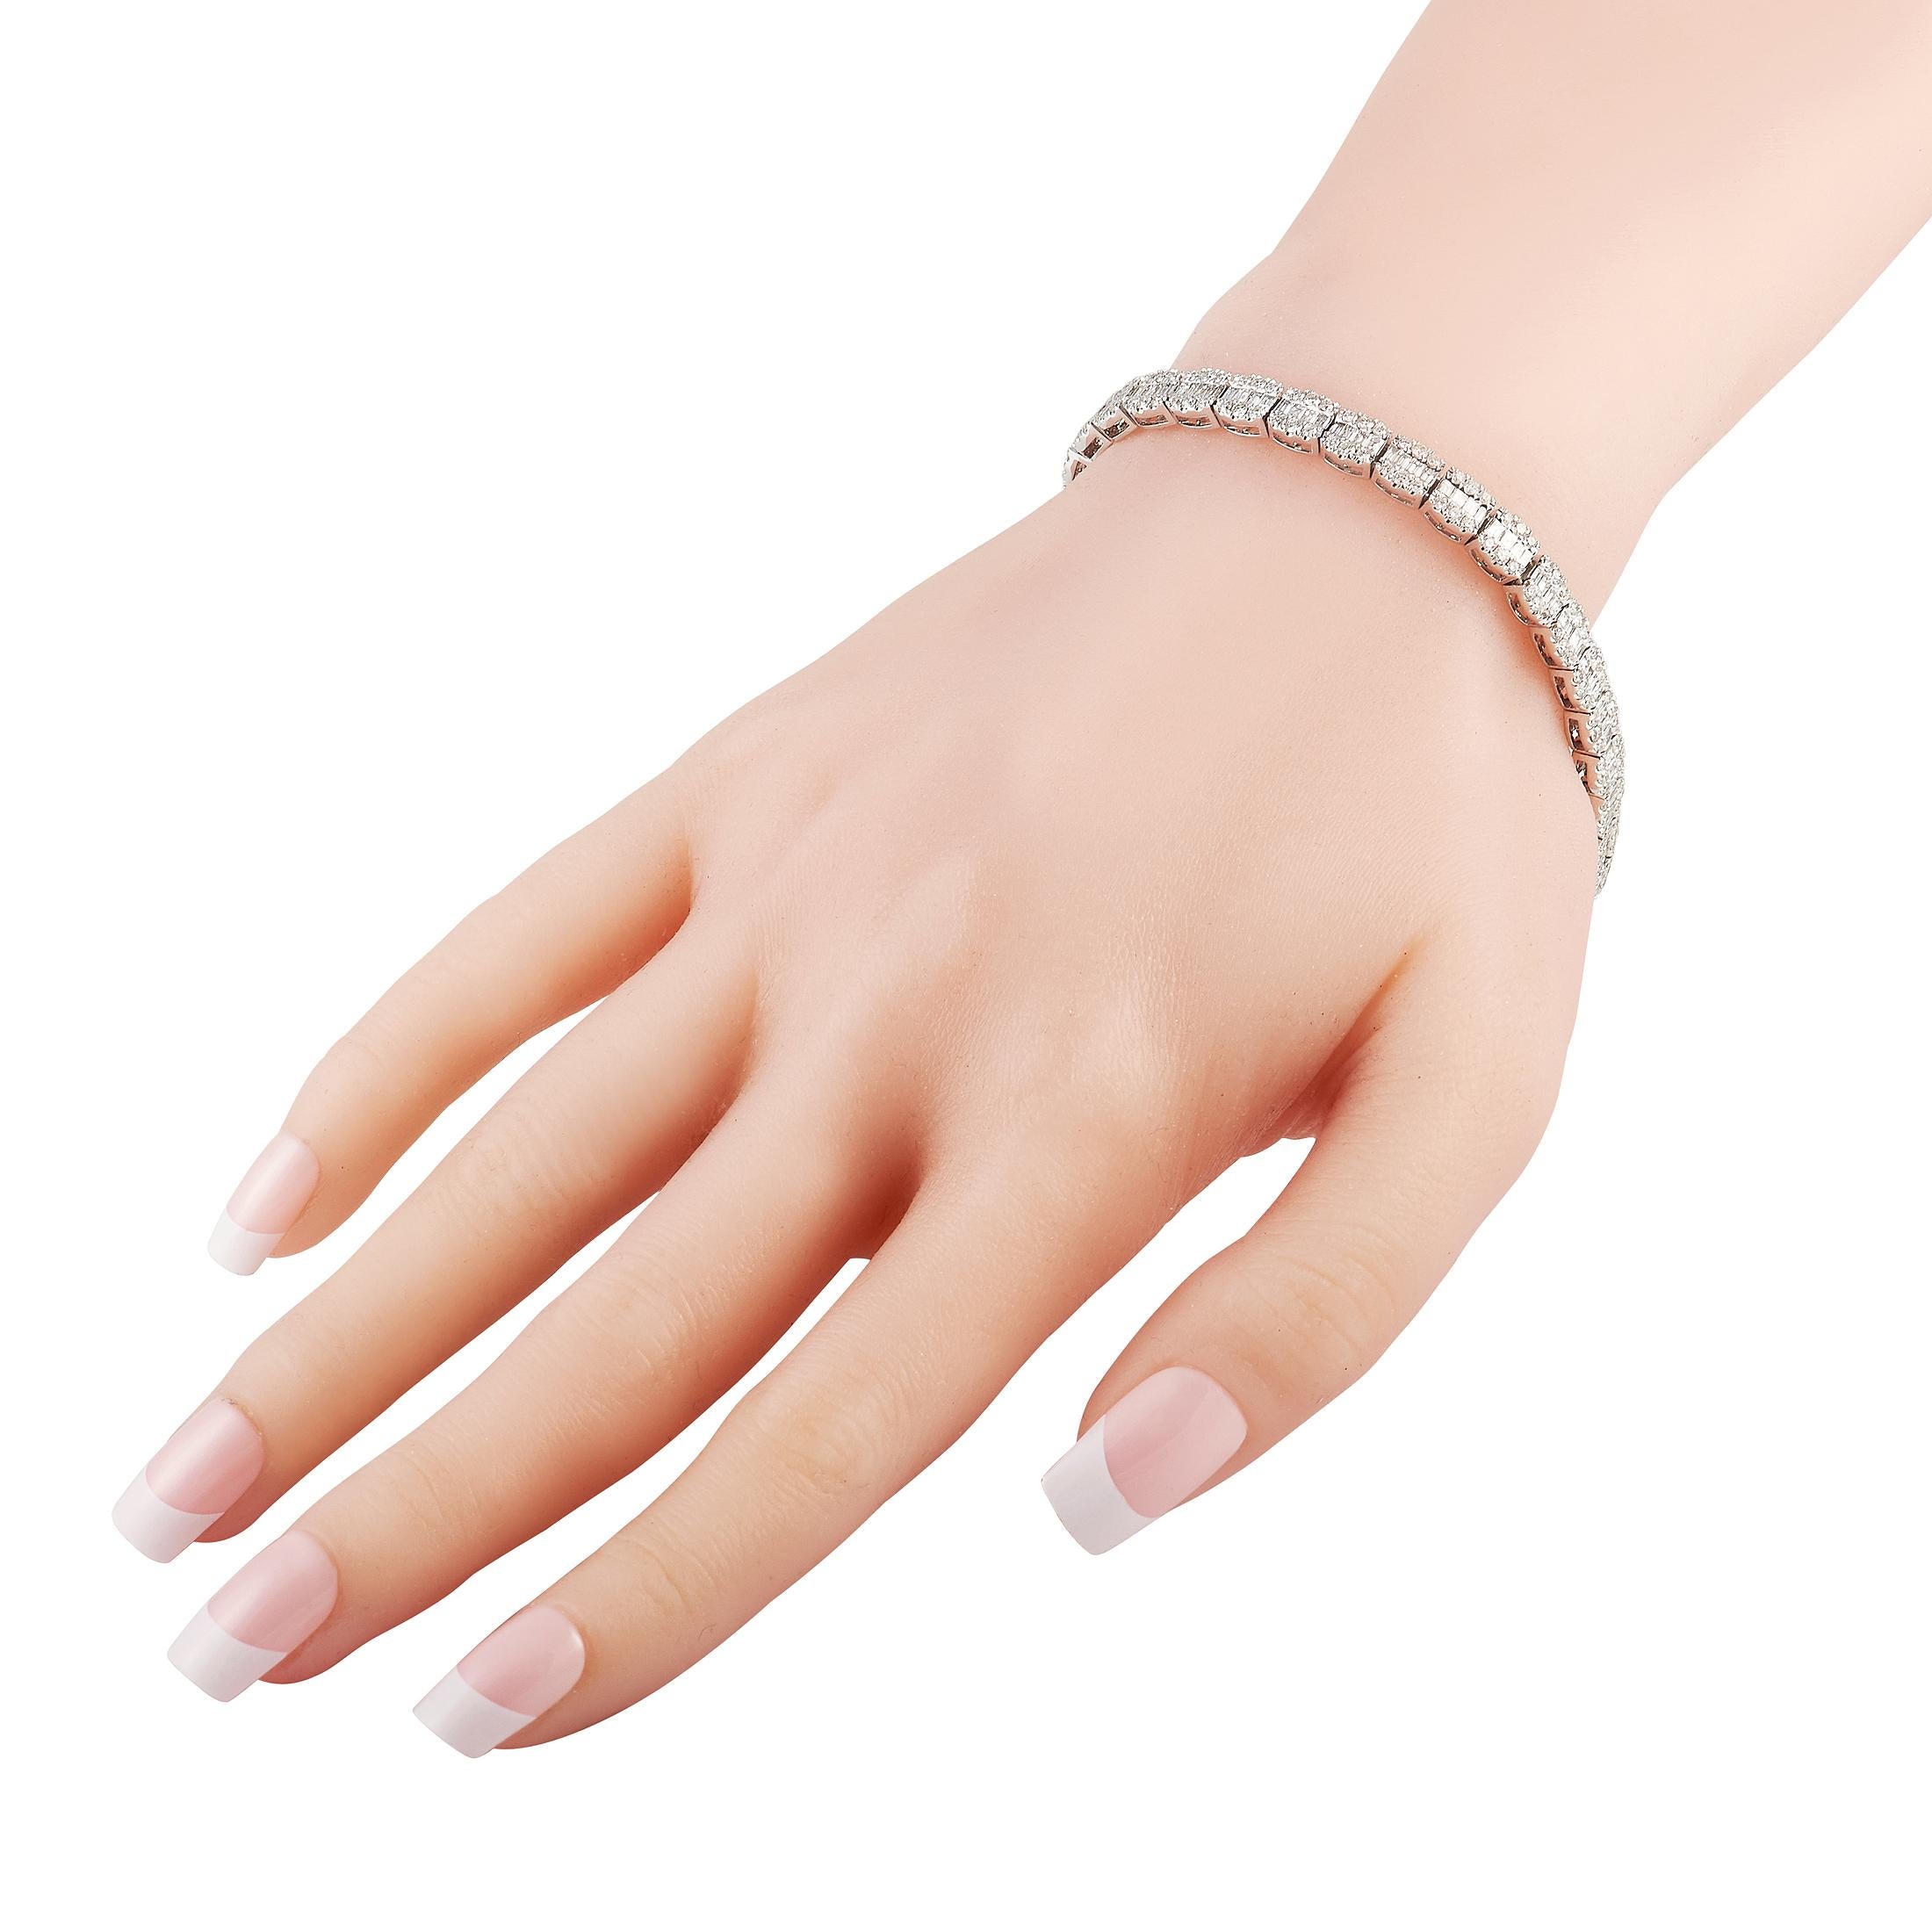 Jazz up your looks with the white shine and bright sparkle of this LB Exclusive bracelet. Measuring 8